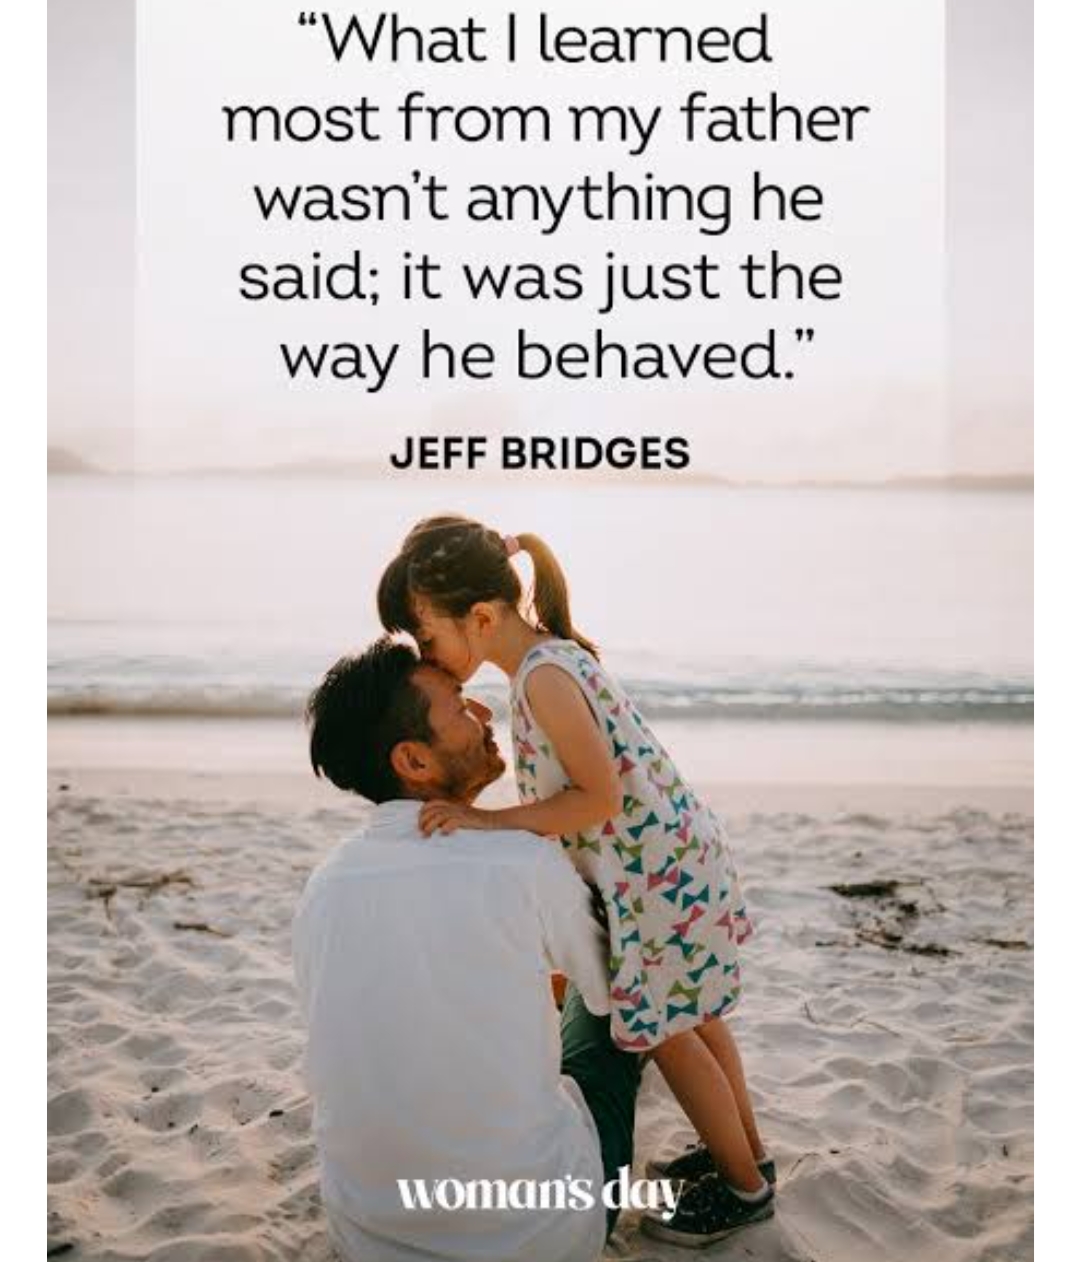 Dads - Our First Heroes